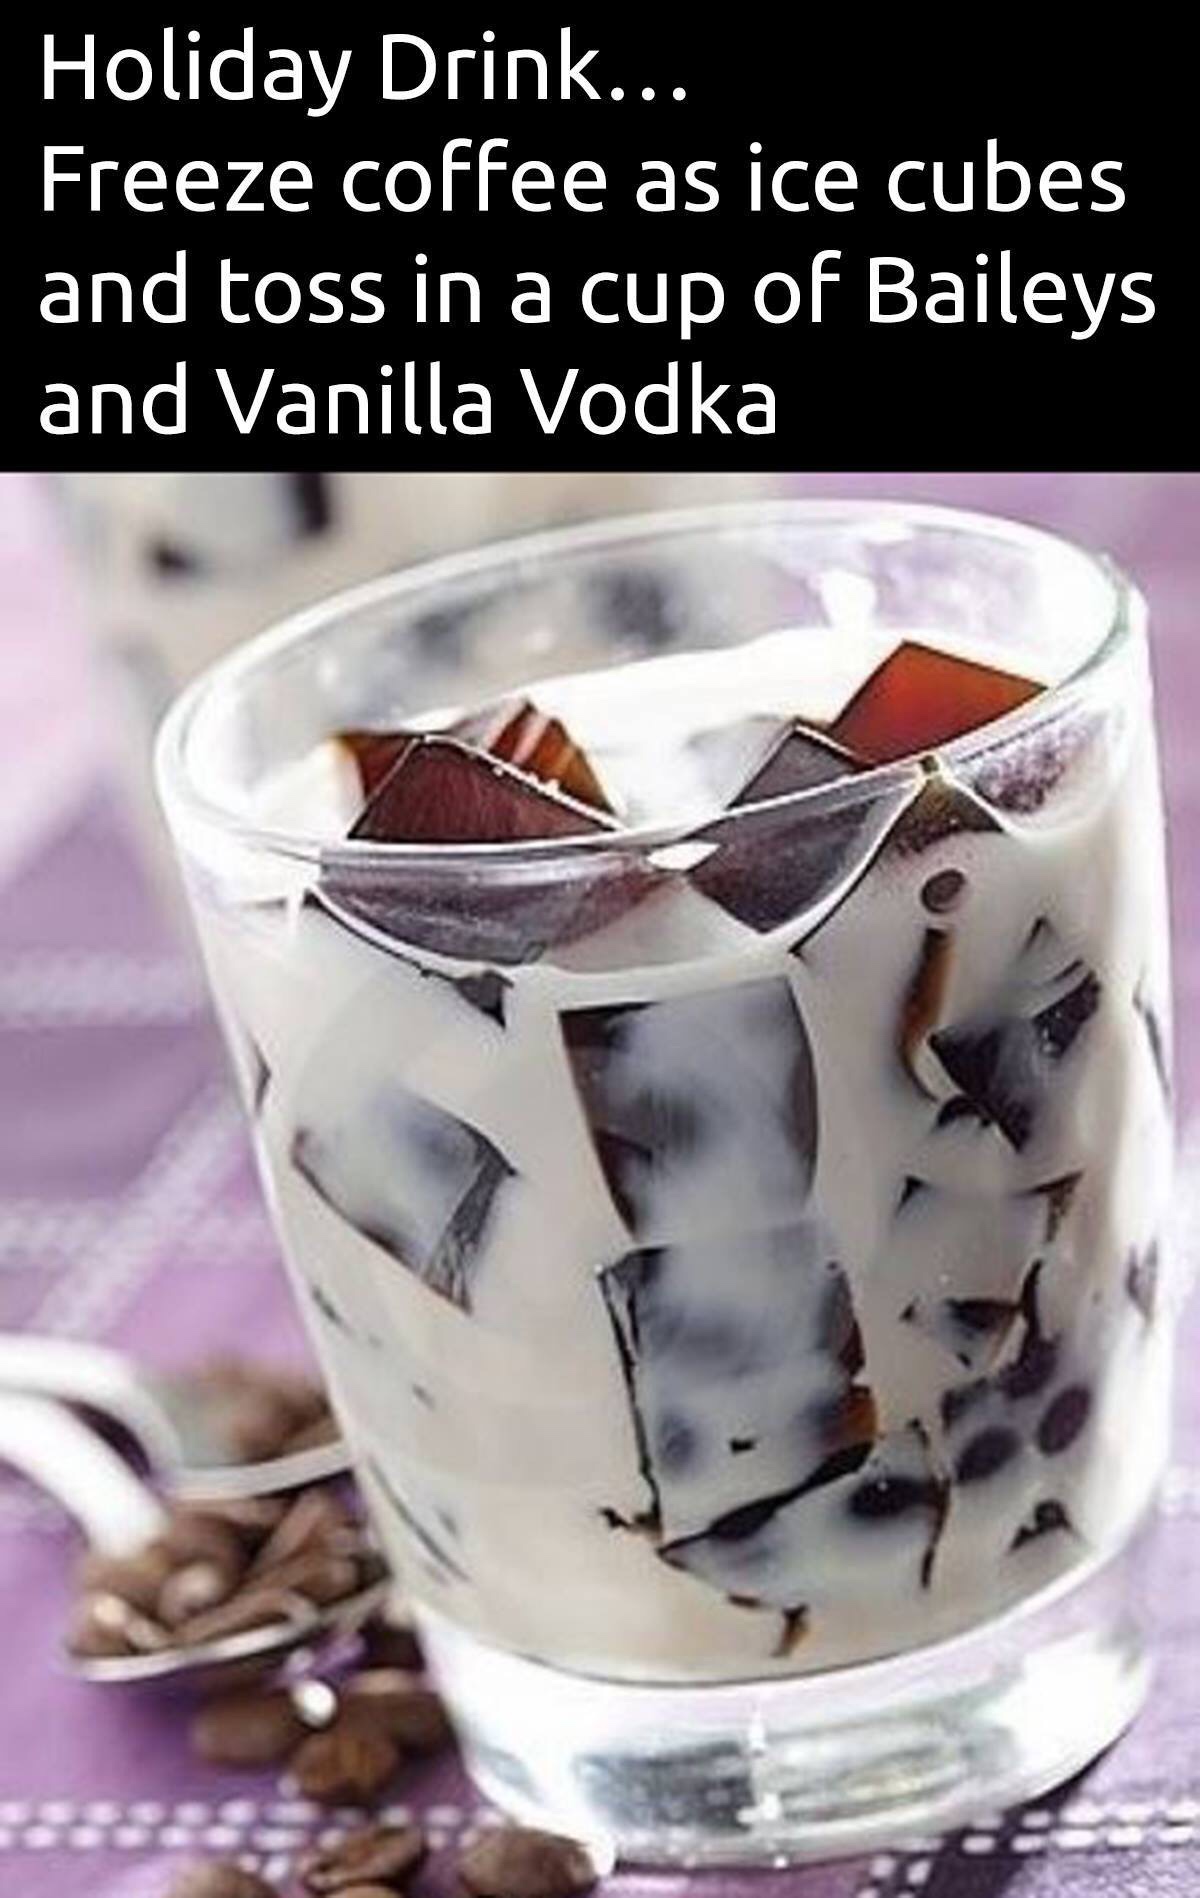 coffee ice cubes and baileys - Holiday Drink... Freeze coffee as ice cubes and toss in a cup of Baileys and Vanilla Vodka